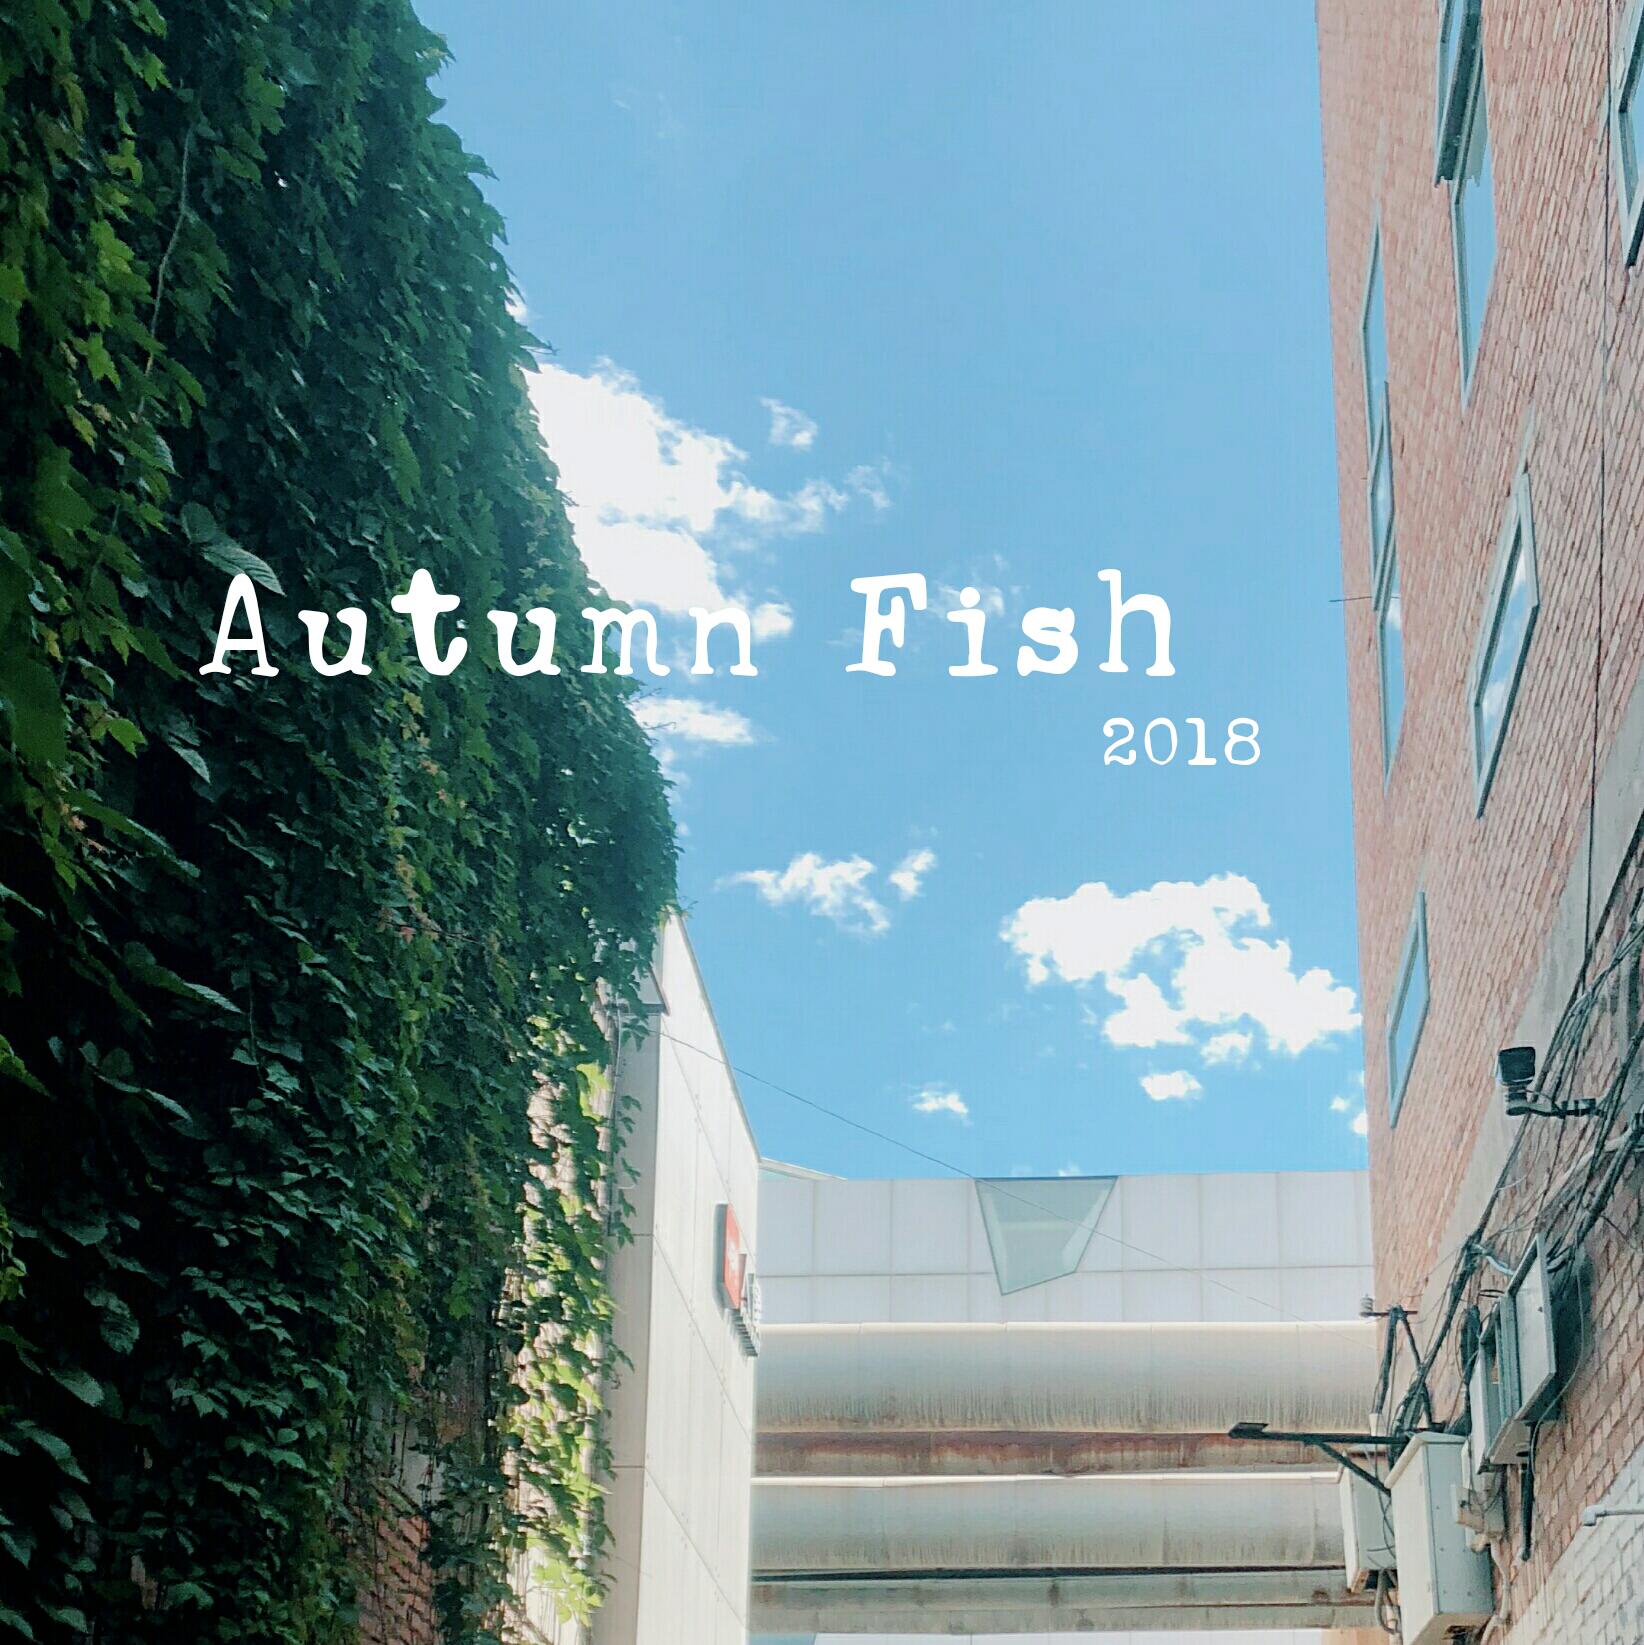 Autumn Fish from 2018